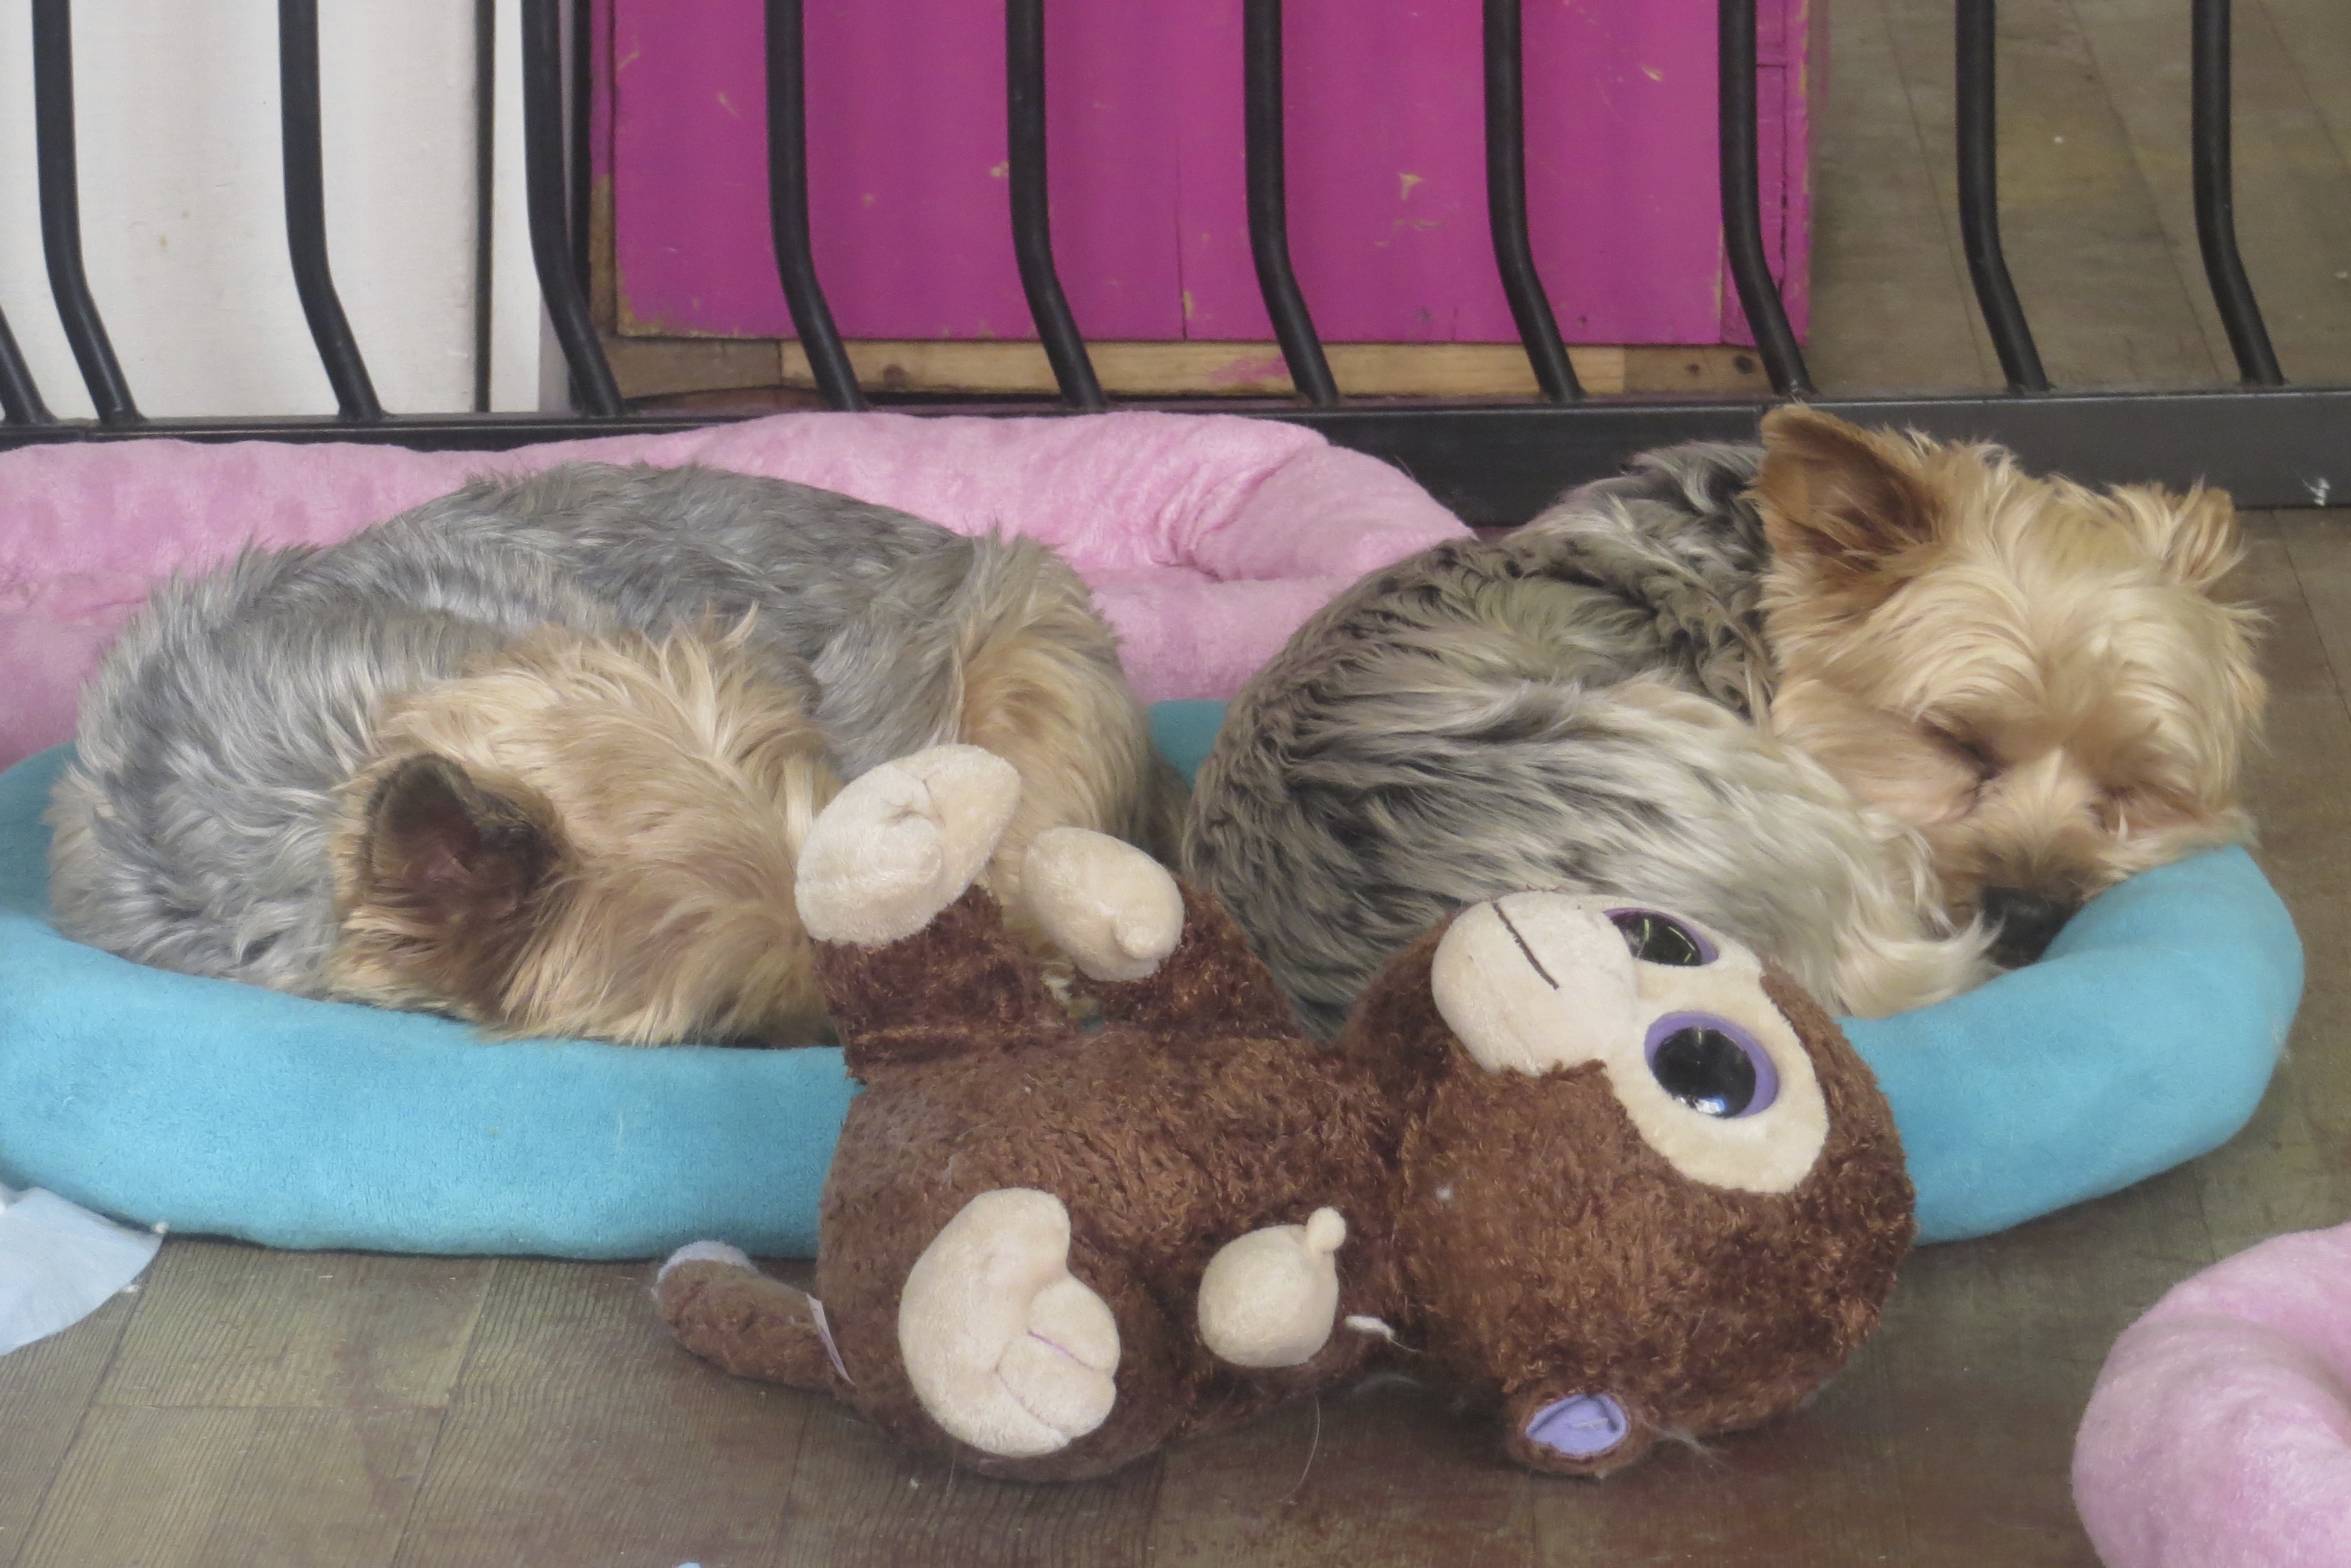 Two Sleeping Yorkshire Terriers And a Stuffed Animal On A Dog Bed